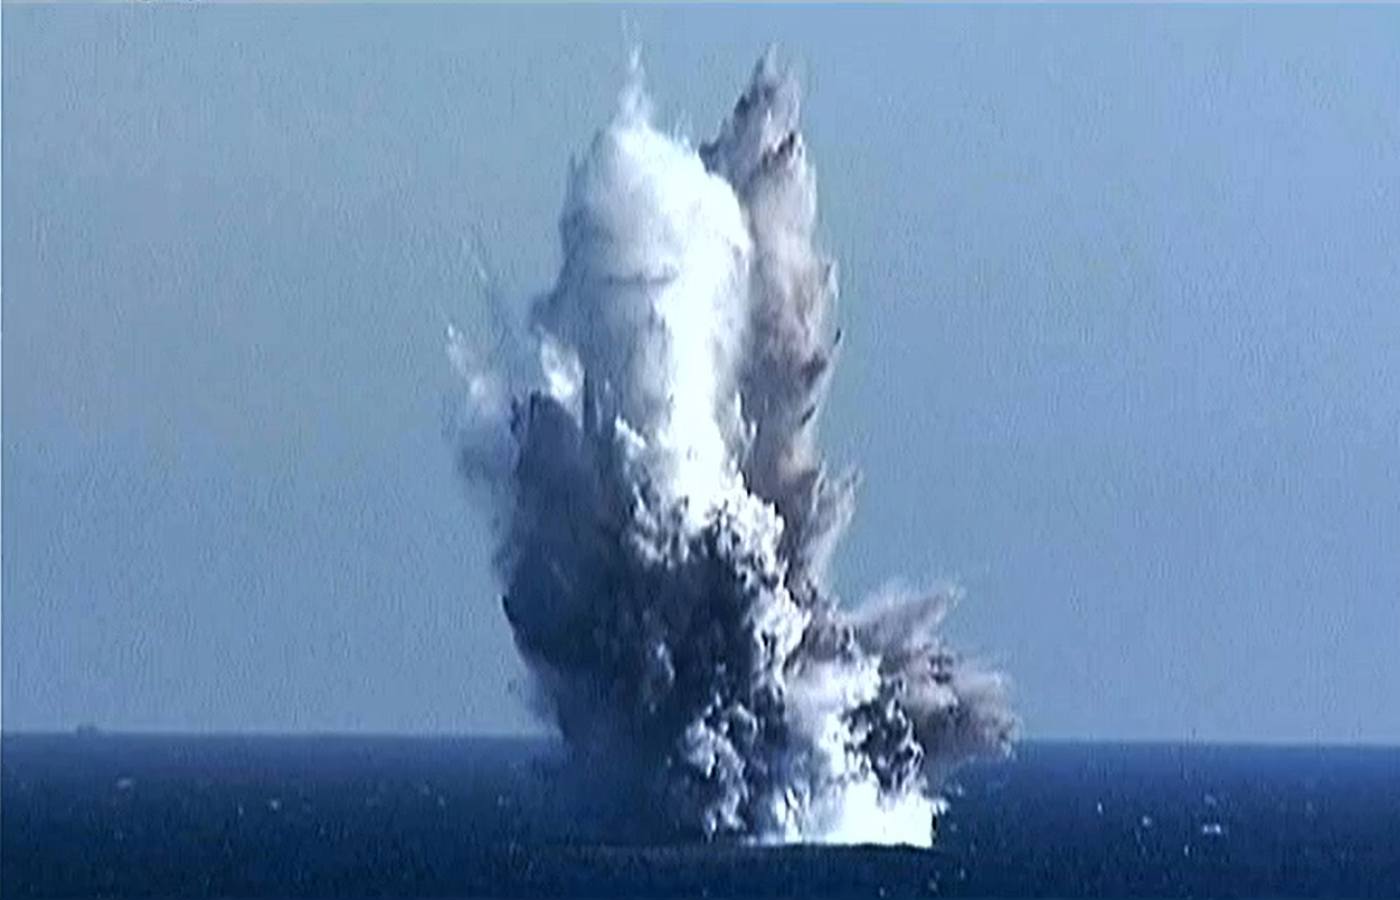 Haeil: North Korea claims to have tested a nuclear-capable underwater drone that can generate a gigantic “radioactive tsunami” and destroy naval strike groups and ports.

